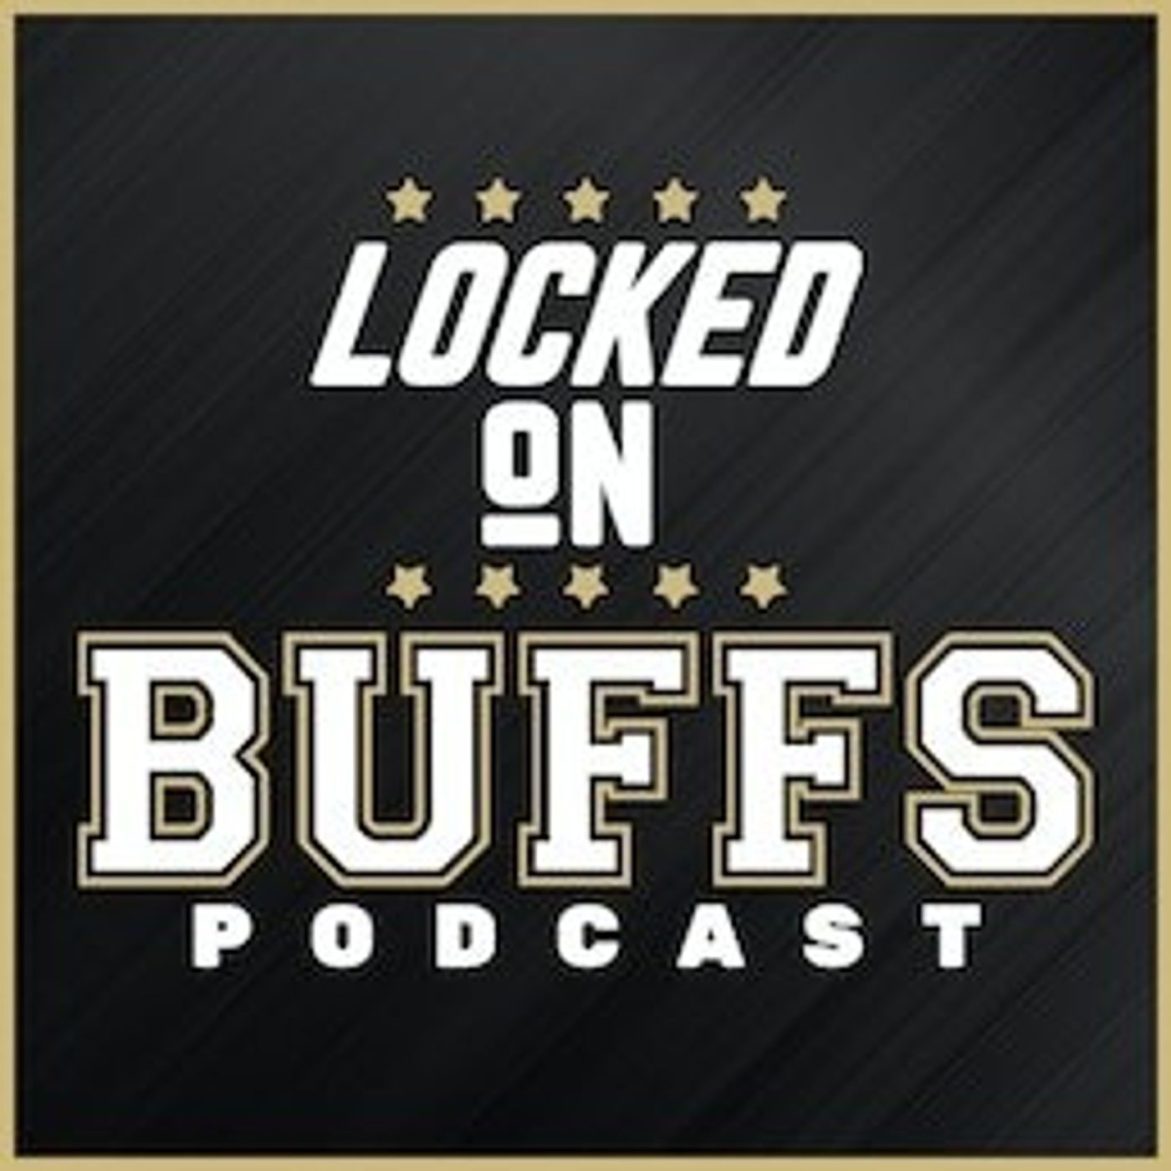 Black Podcasting - This Is March! Colorado Stuns Florida In Final Seconds